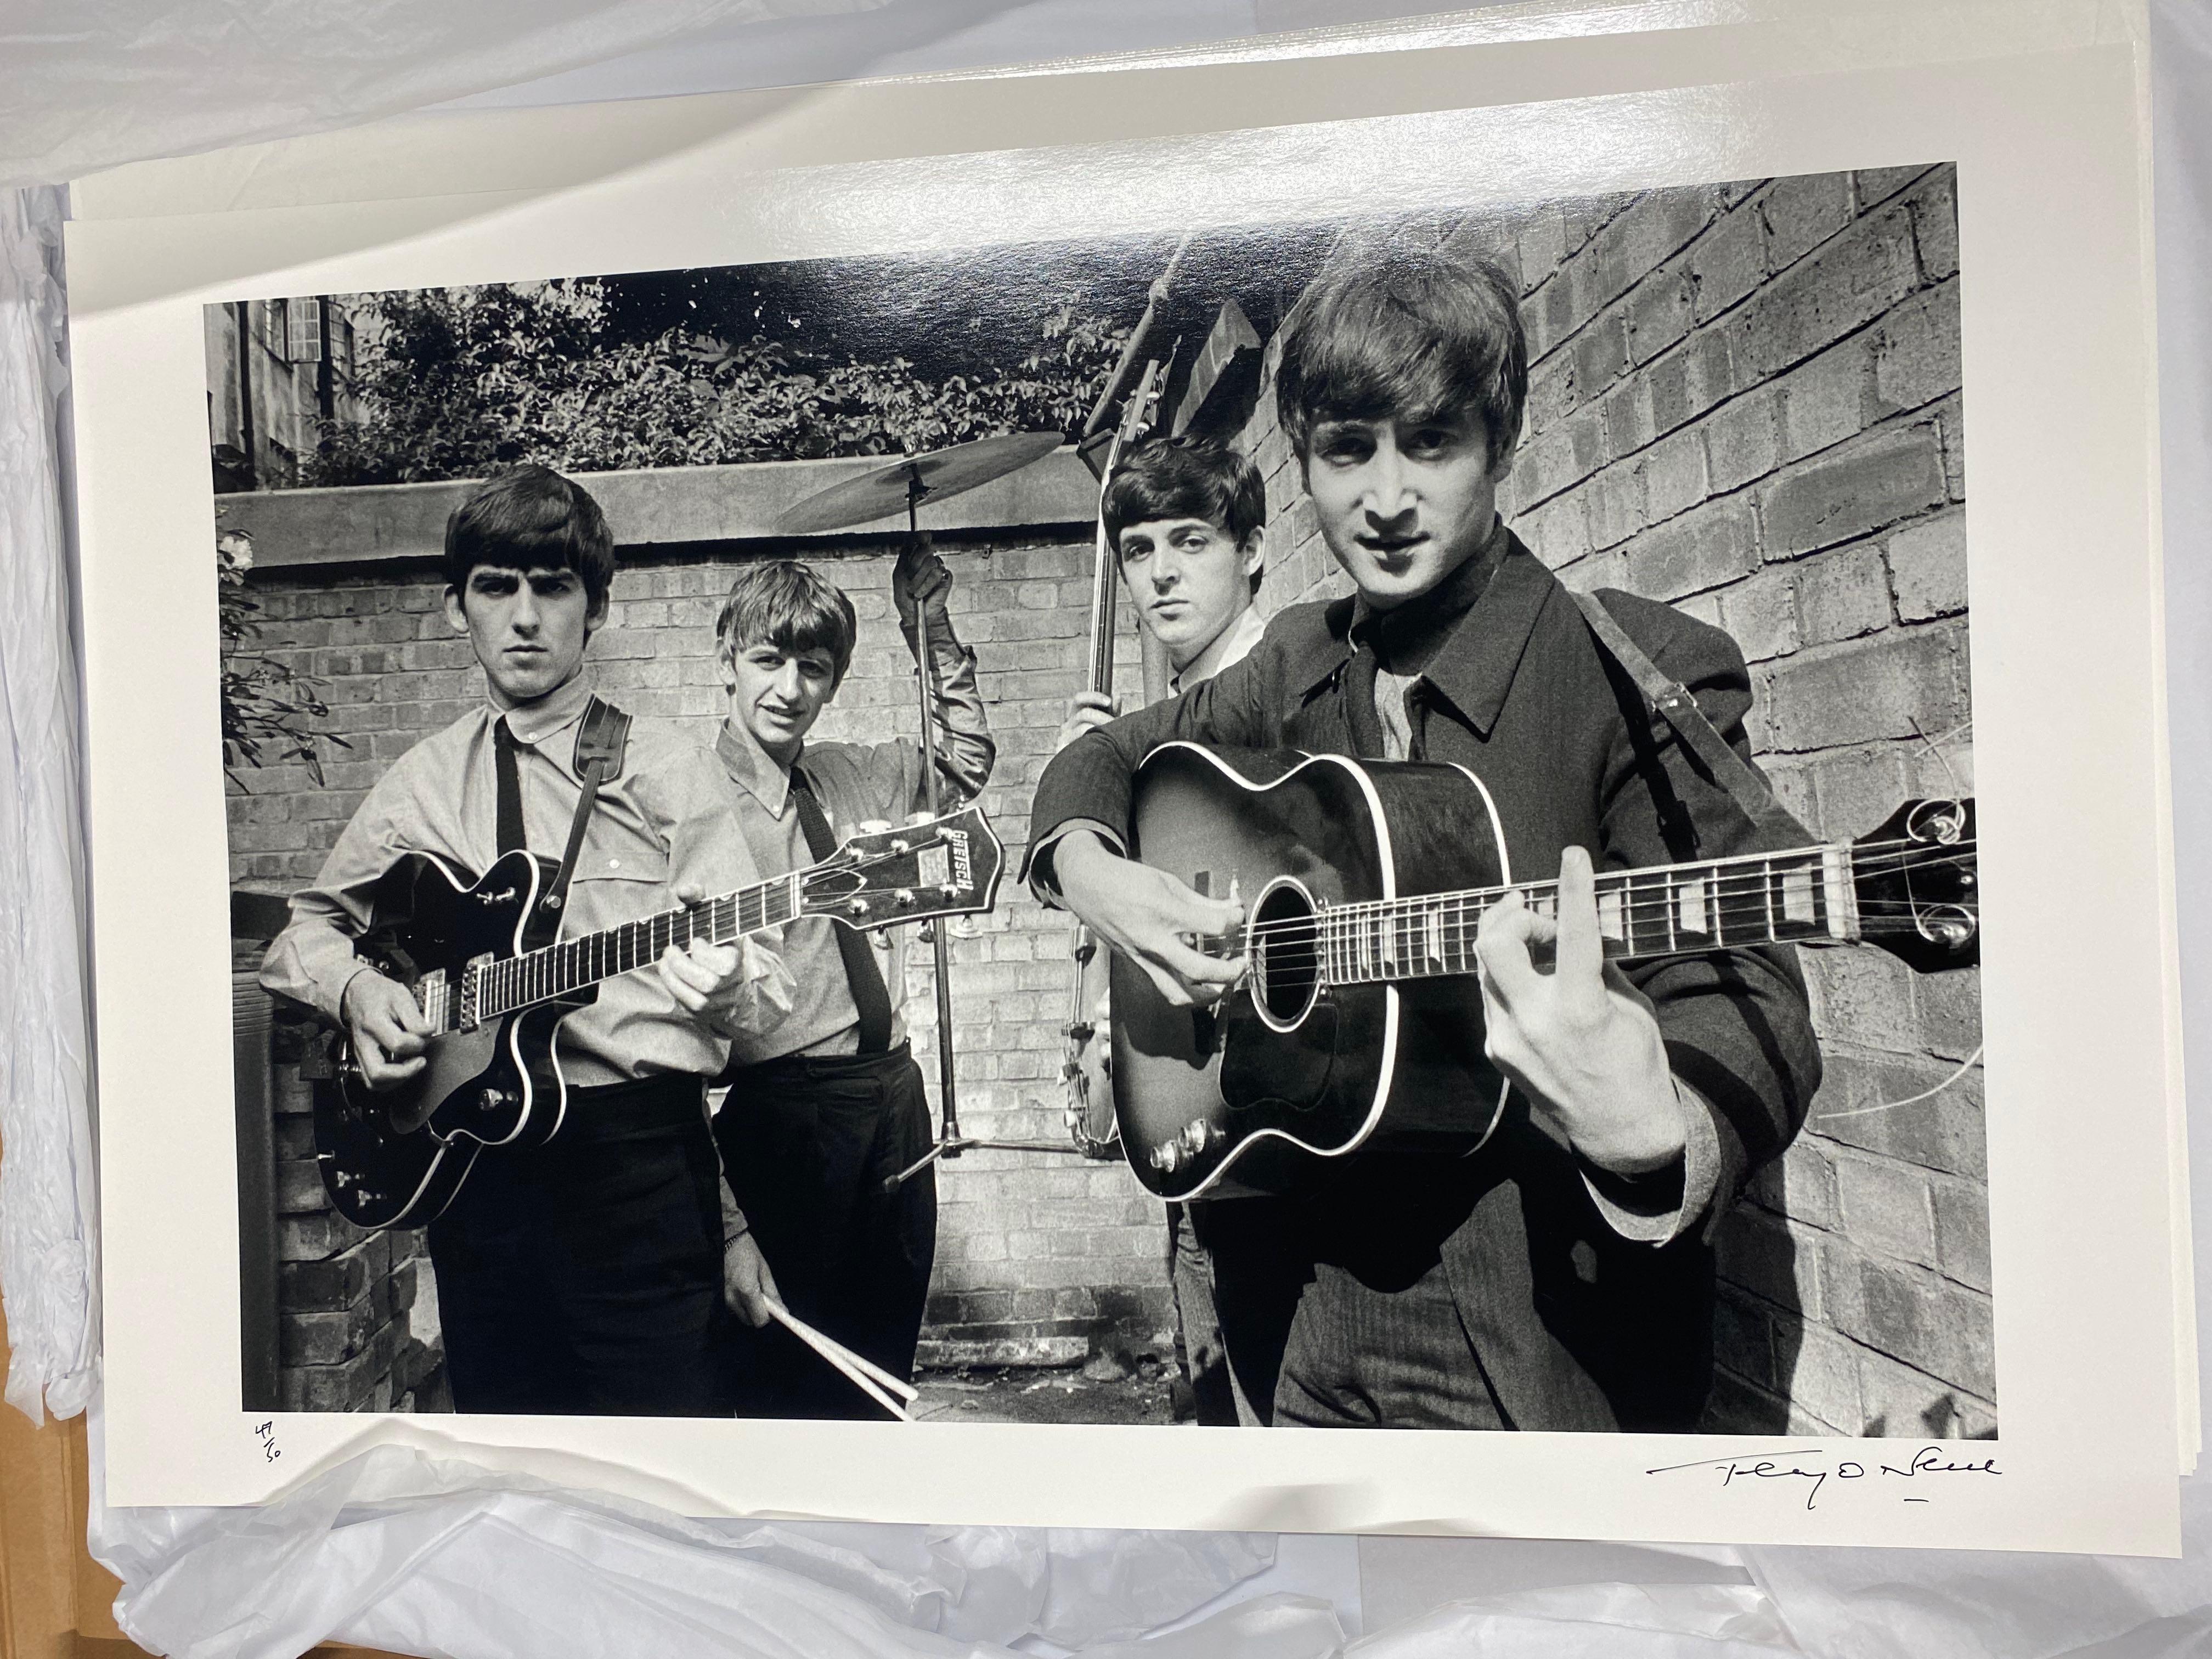 Terry O'Neill 'The Beatles' im Angebot 1